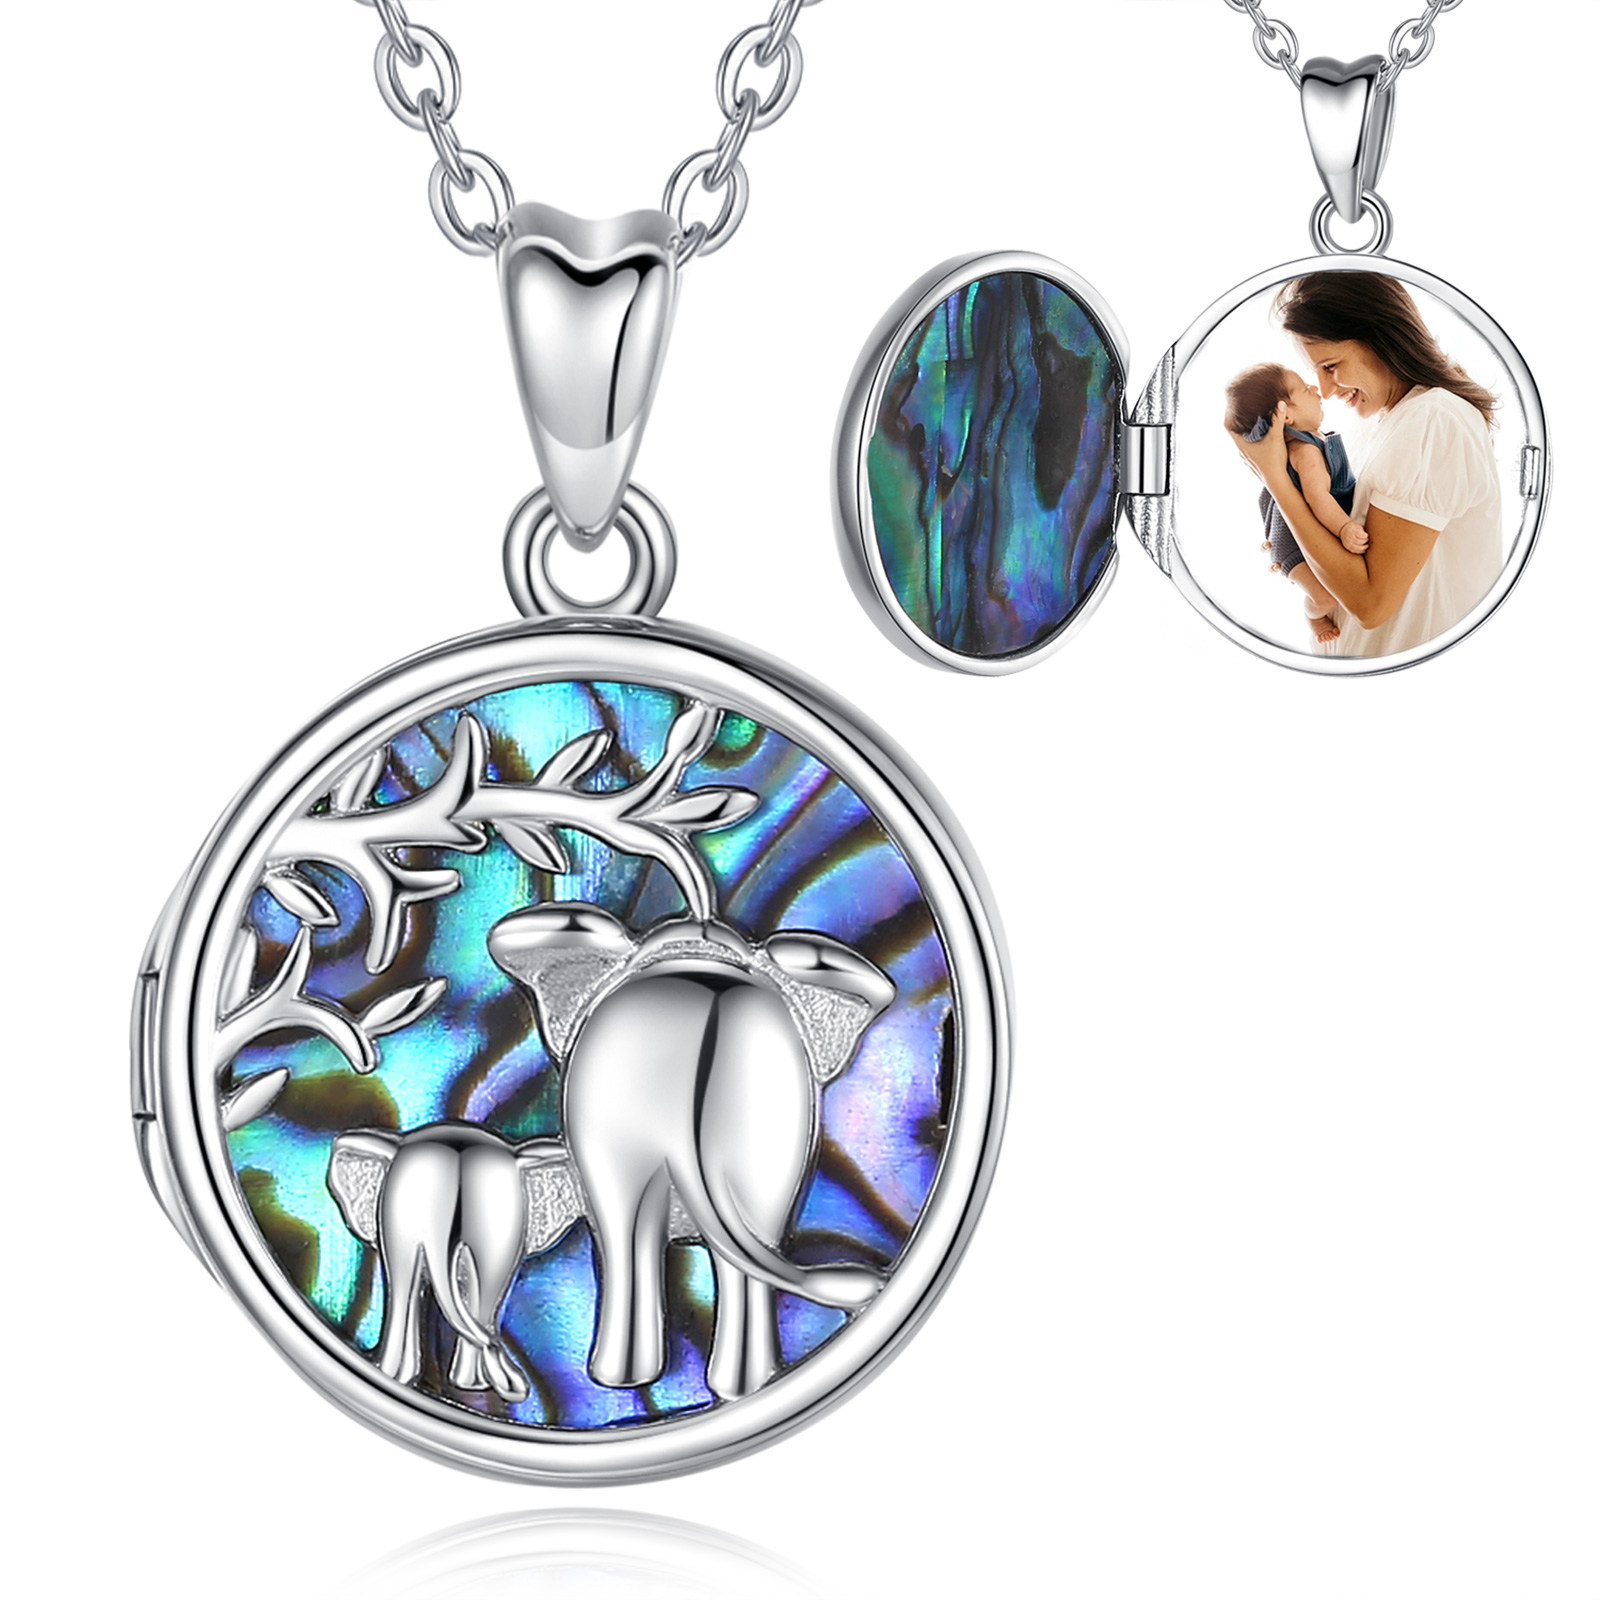 Merryshine Jewelry S925 Sterling Silver Abalone Shell Good Luck Elephant Photo Locket Pendant Necklace